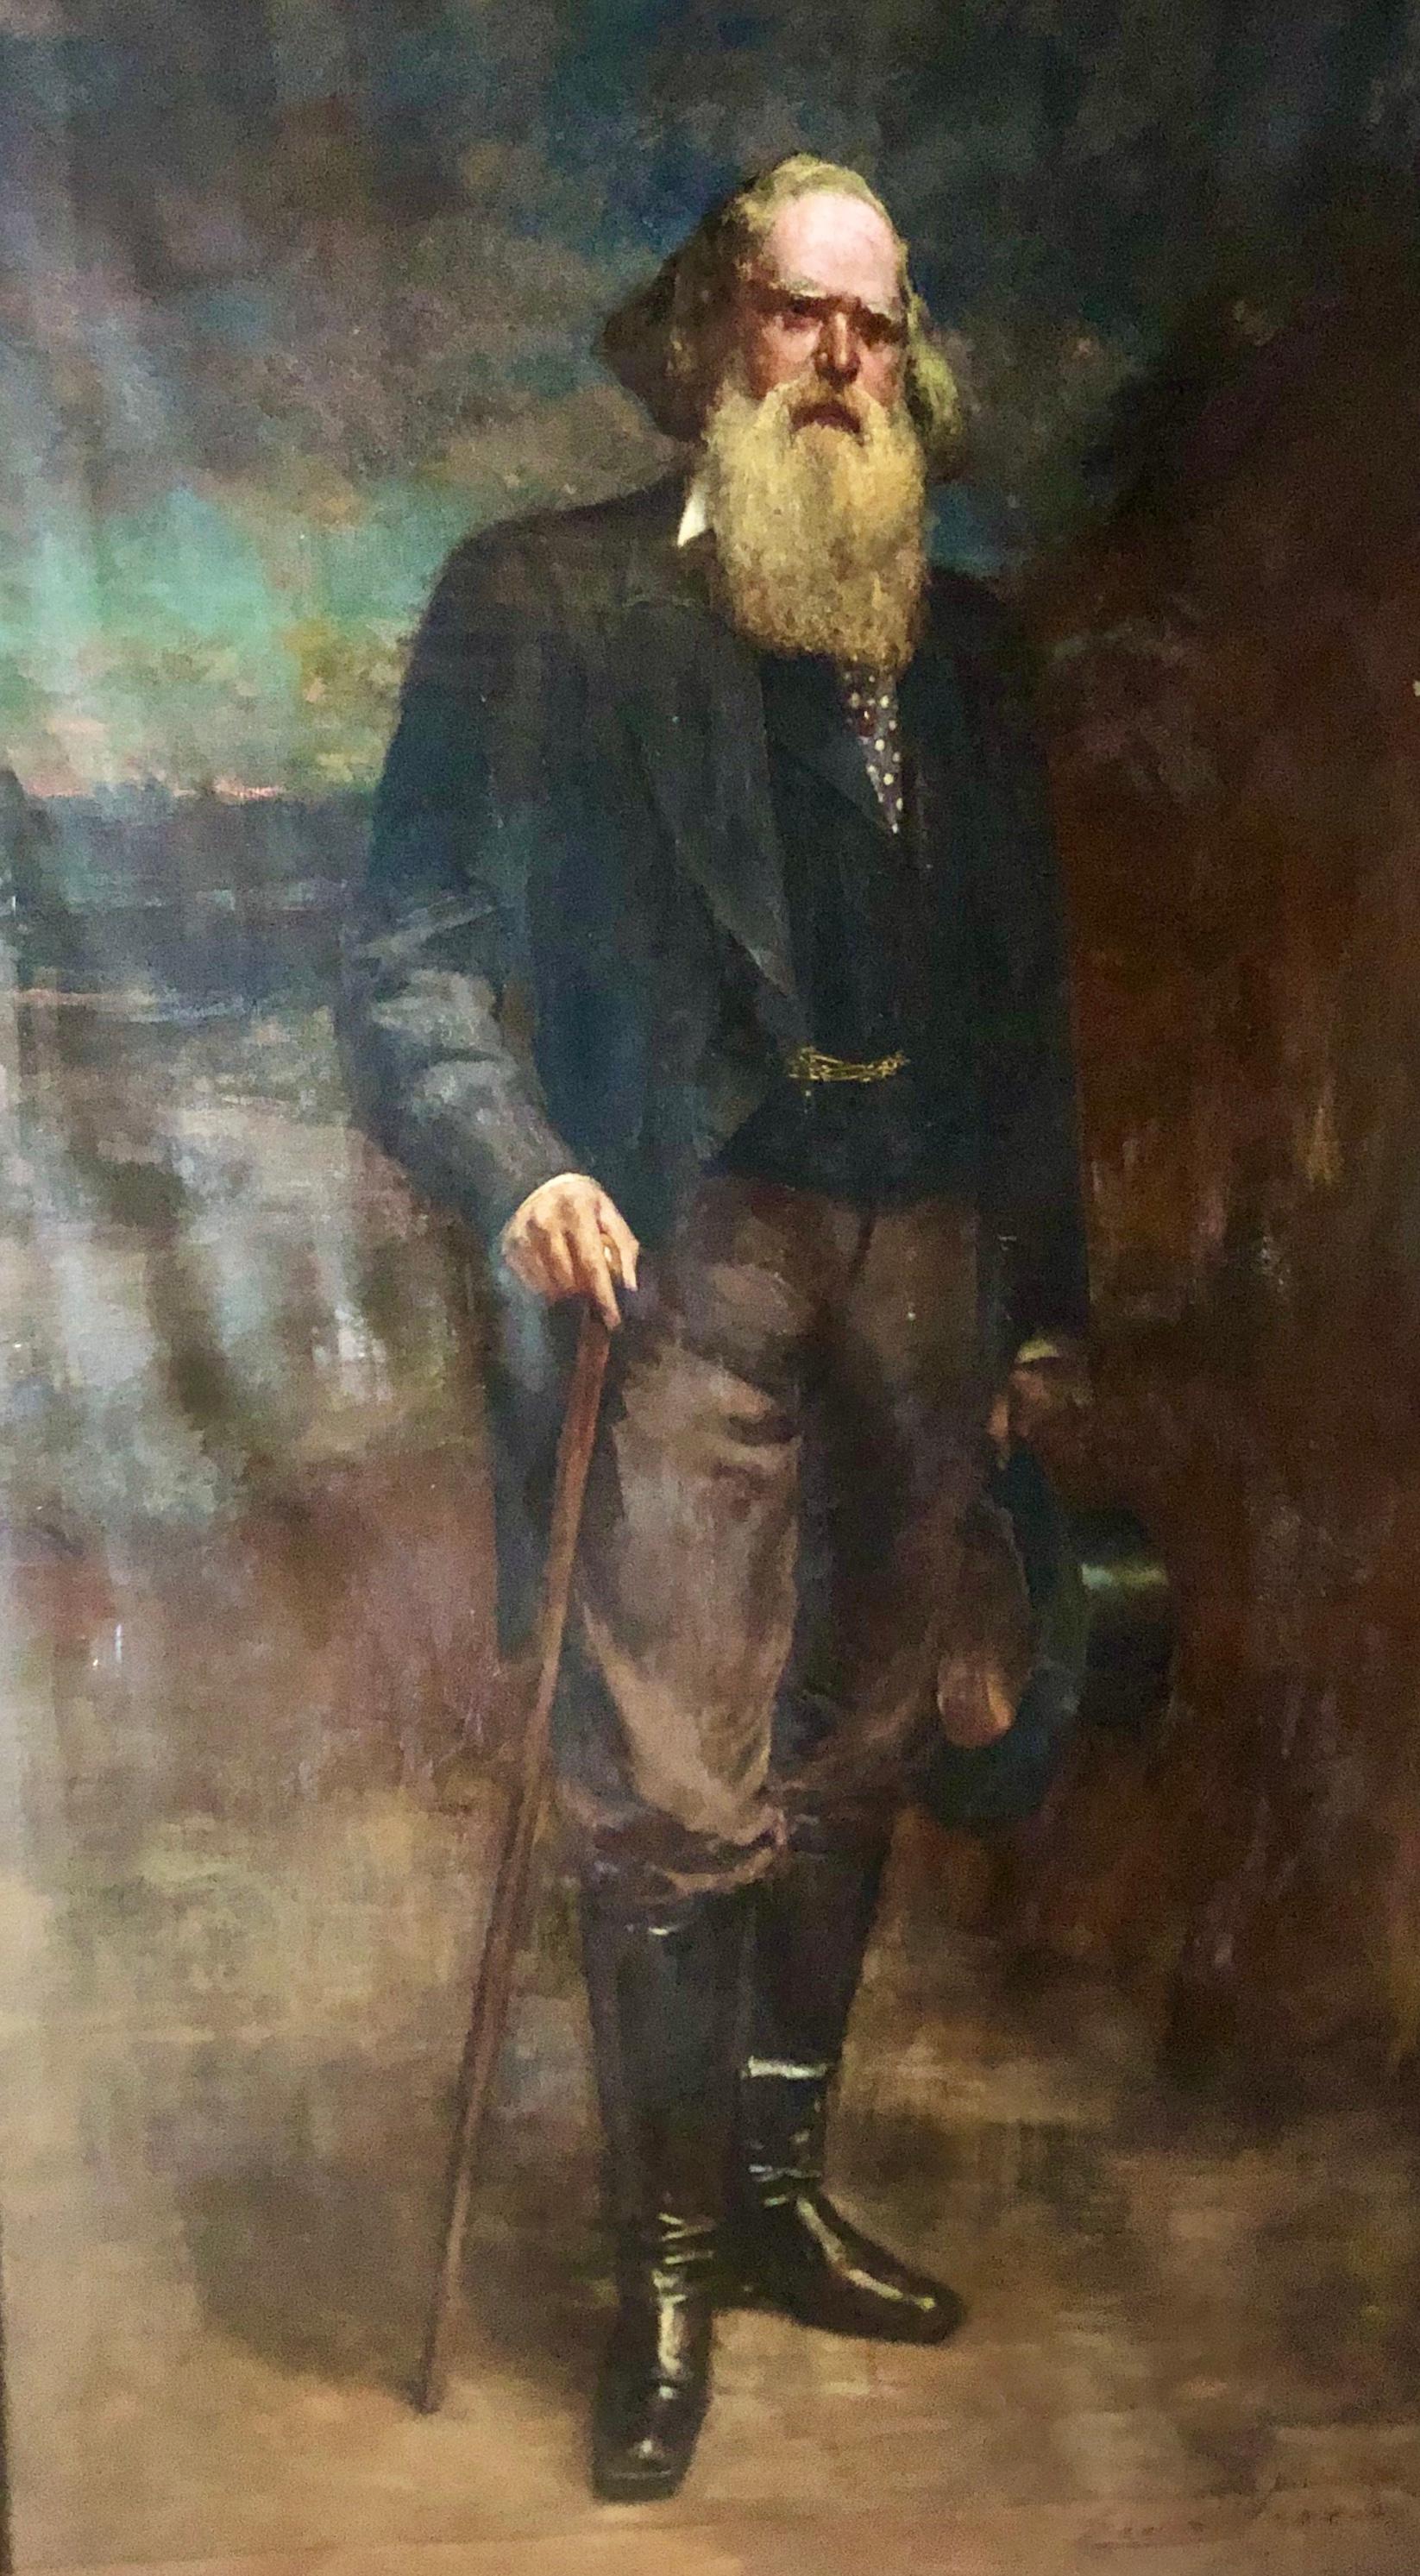 A very large portrait of the 19th century english dignitary surgeon Oliver Pemberton, who was the Birmingham General Hospital Surgeon from 1852. He became a Fellow of the Royal College of Surgeons in 1878 (which this painting commemorates) and